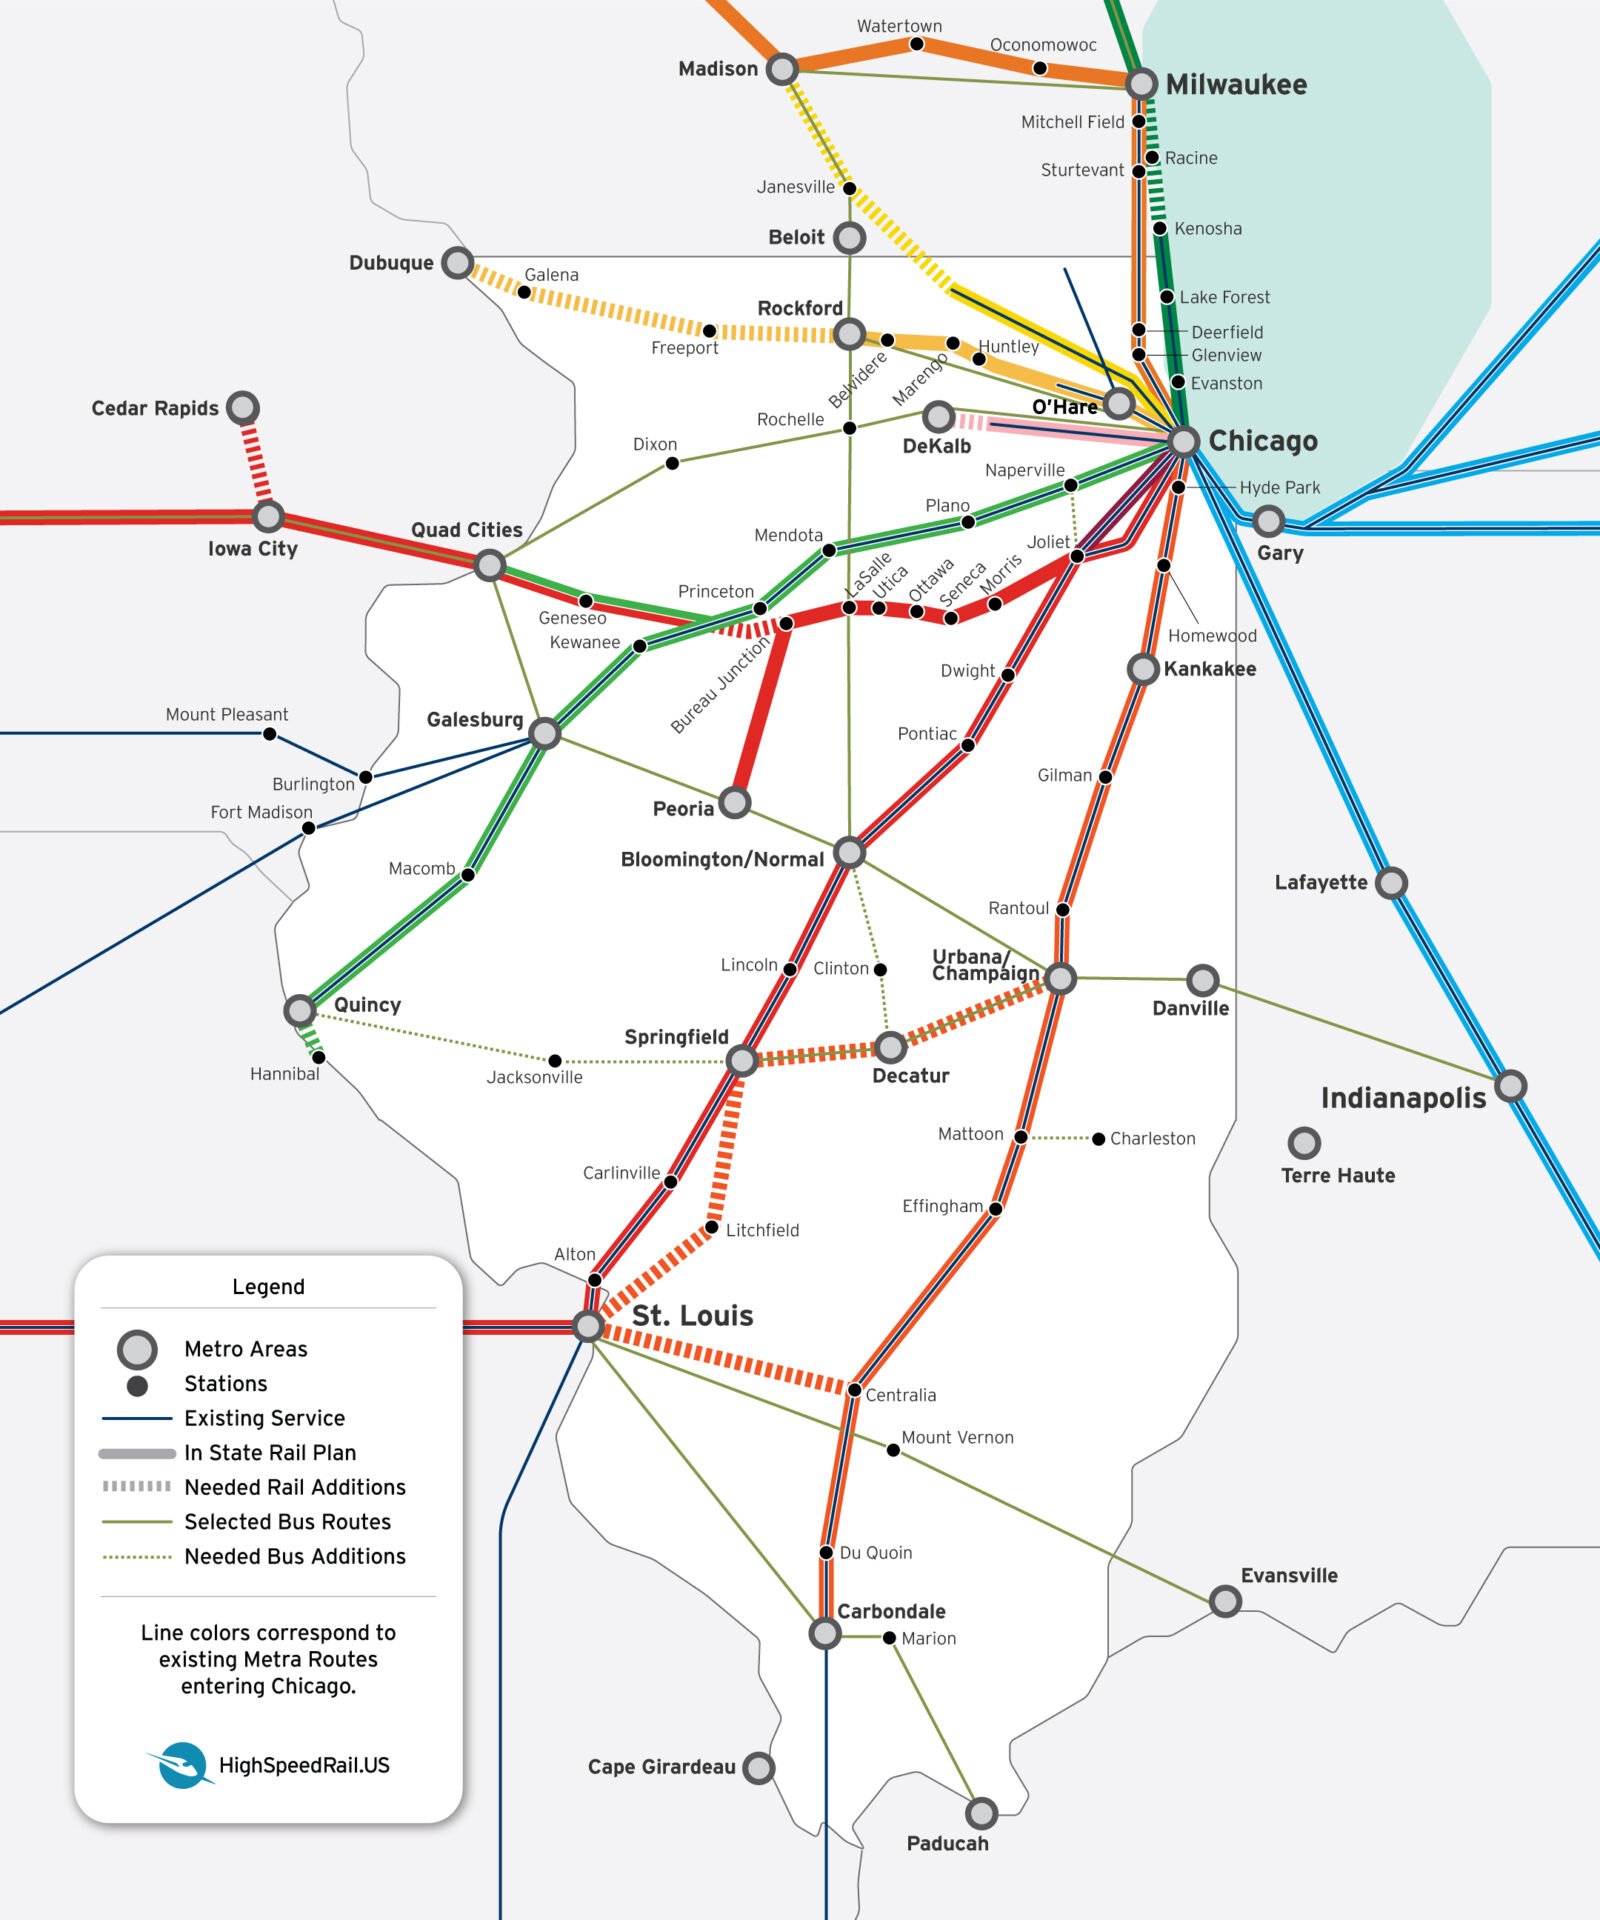 A map showing a potential high-speed and regional rail network connecting all metros in Illinois to each other and to smaller towns.